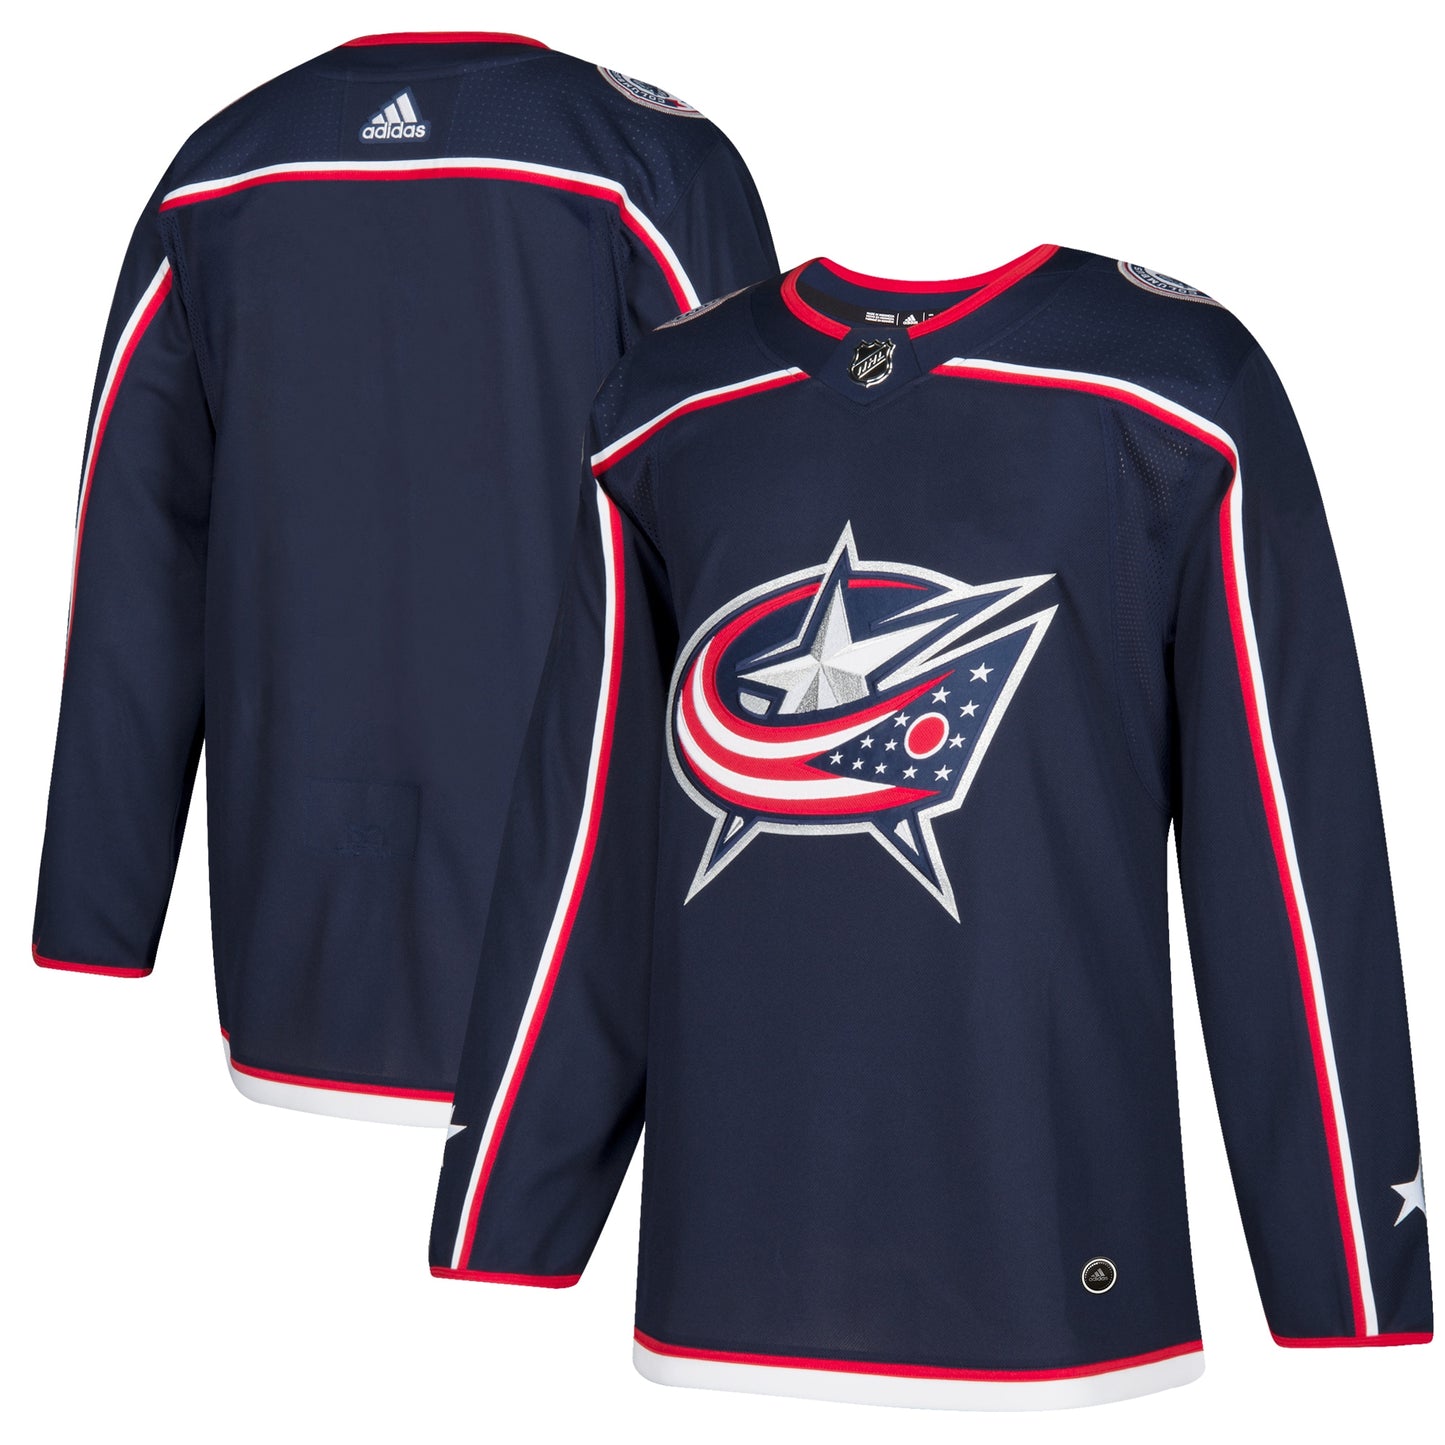 Columbus Blue Jackets adidas Home Authentic Blank Jersey - Navy